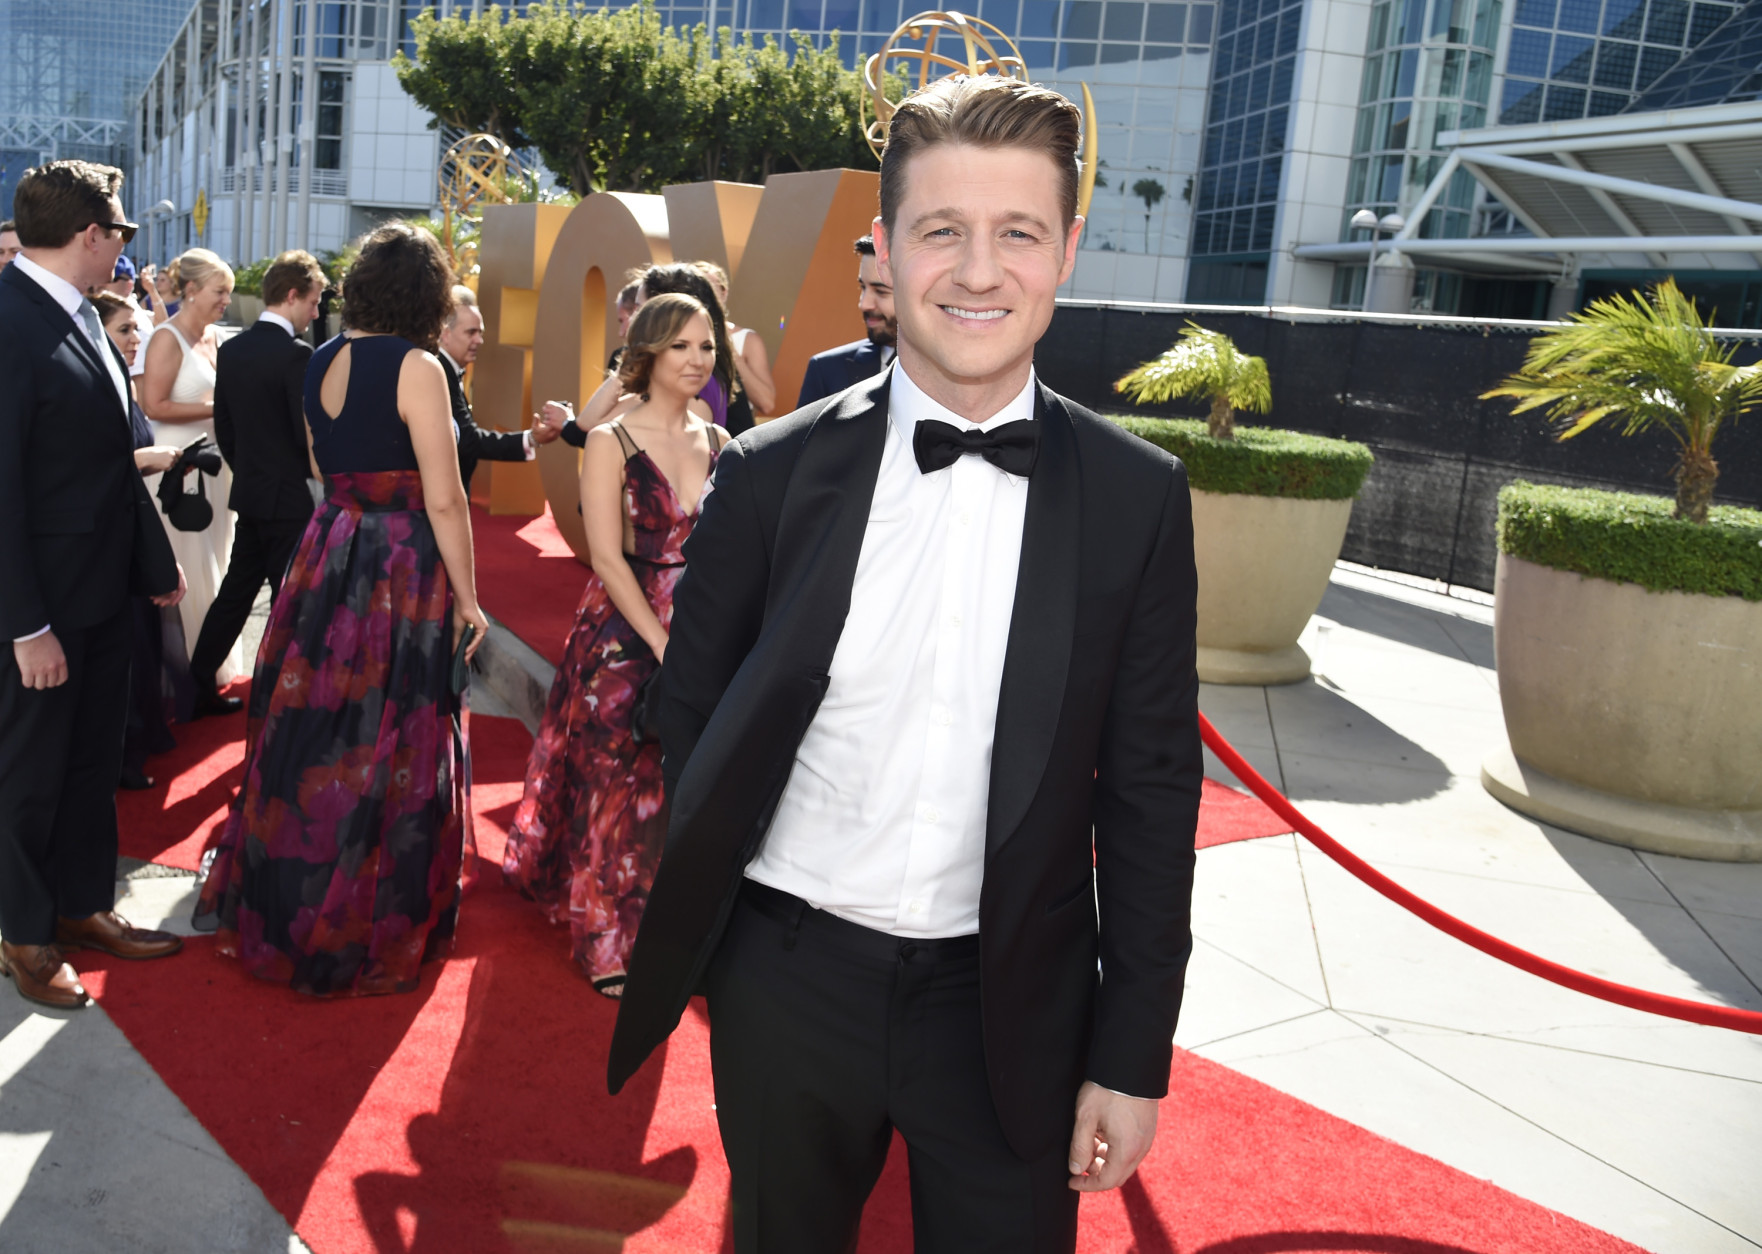 IMAGE DISTRIBUTED FOR THE TELEVISION ACADEMY - Ben McKenzie arrives at the 67th Primetime Emmy Awards on Sunday, Sept. 20, 2015, at the Microsoft Theater in Los Angeles. (Photo by Dan Steinberg/Invision for the Television Academy/AP Images)